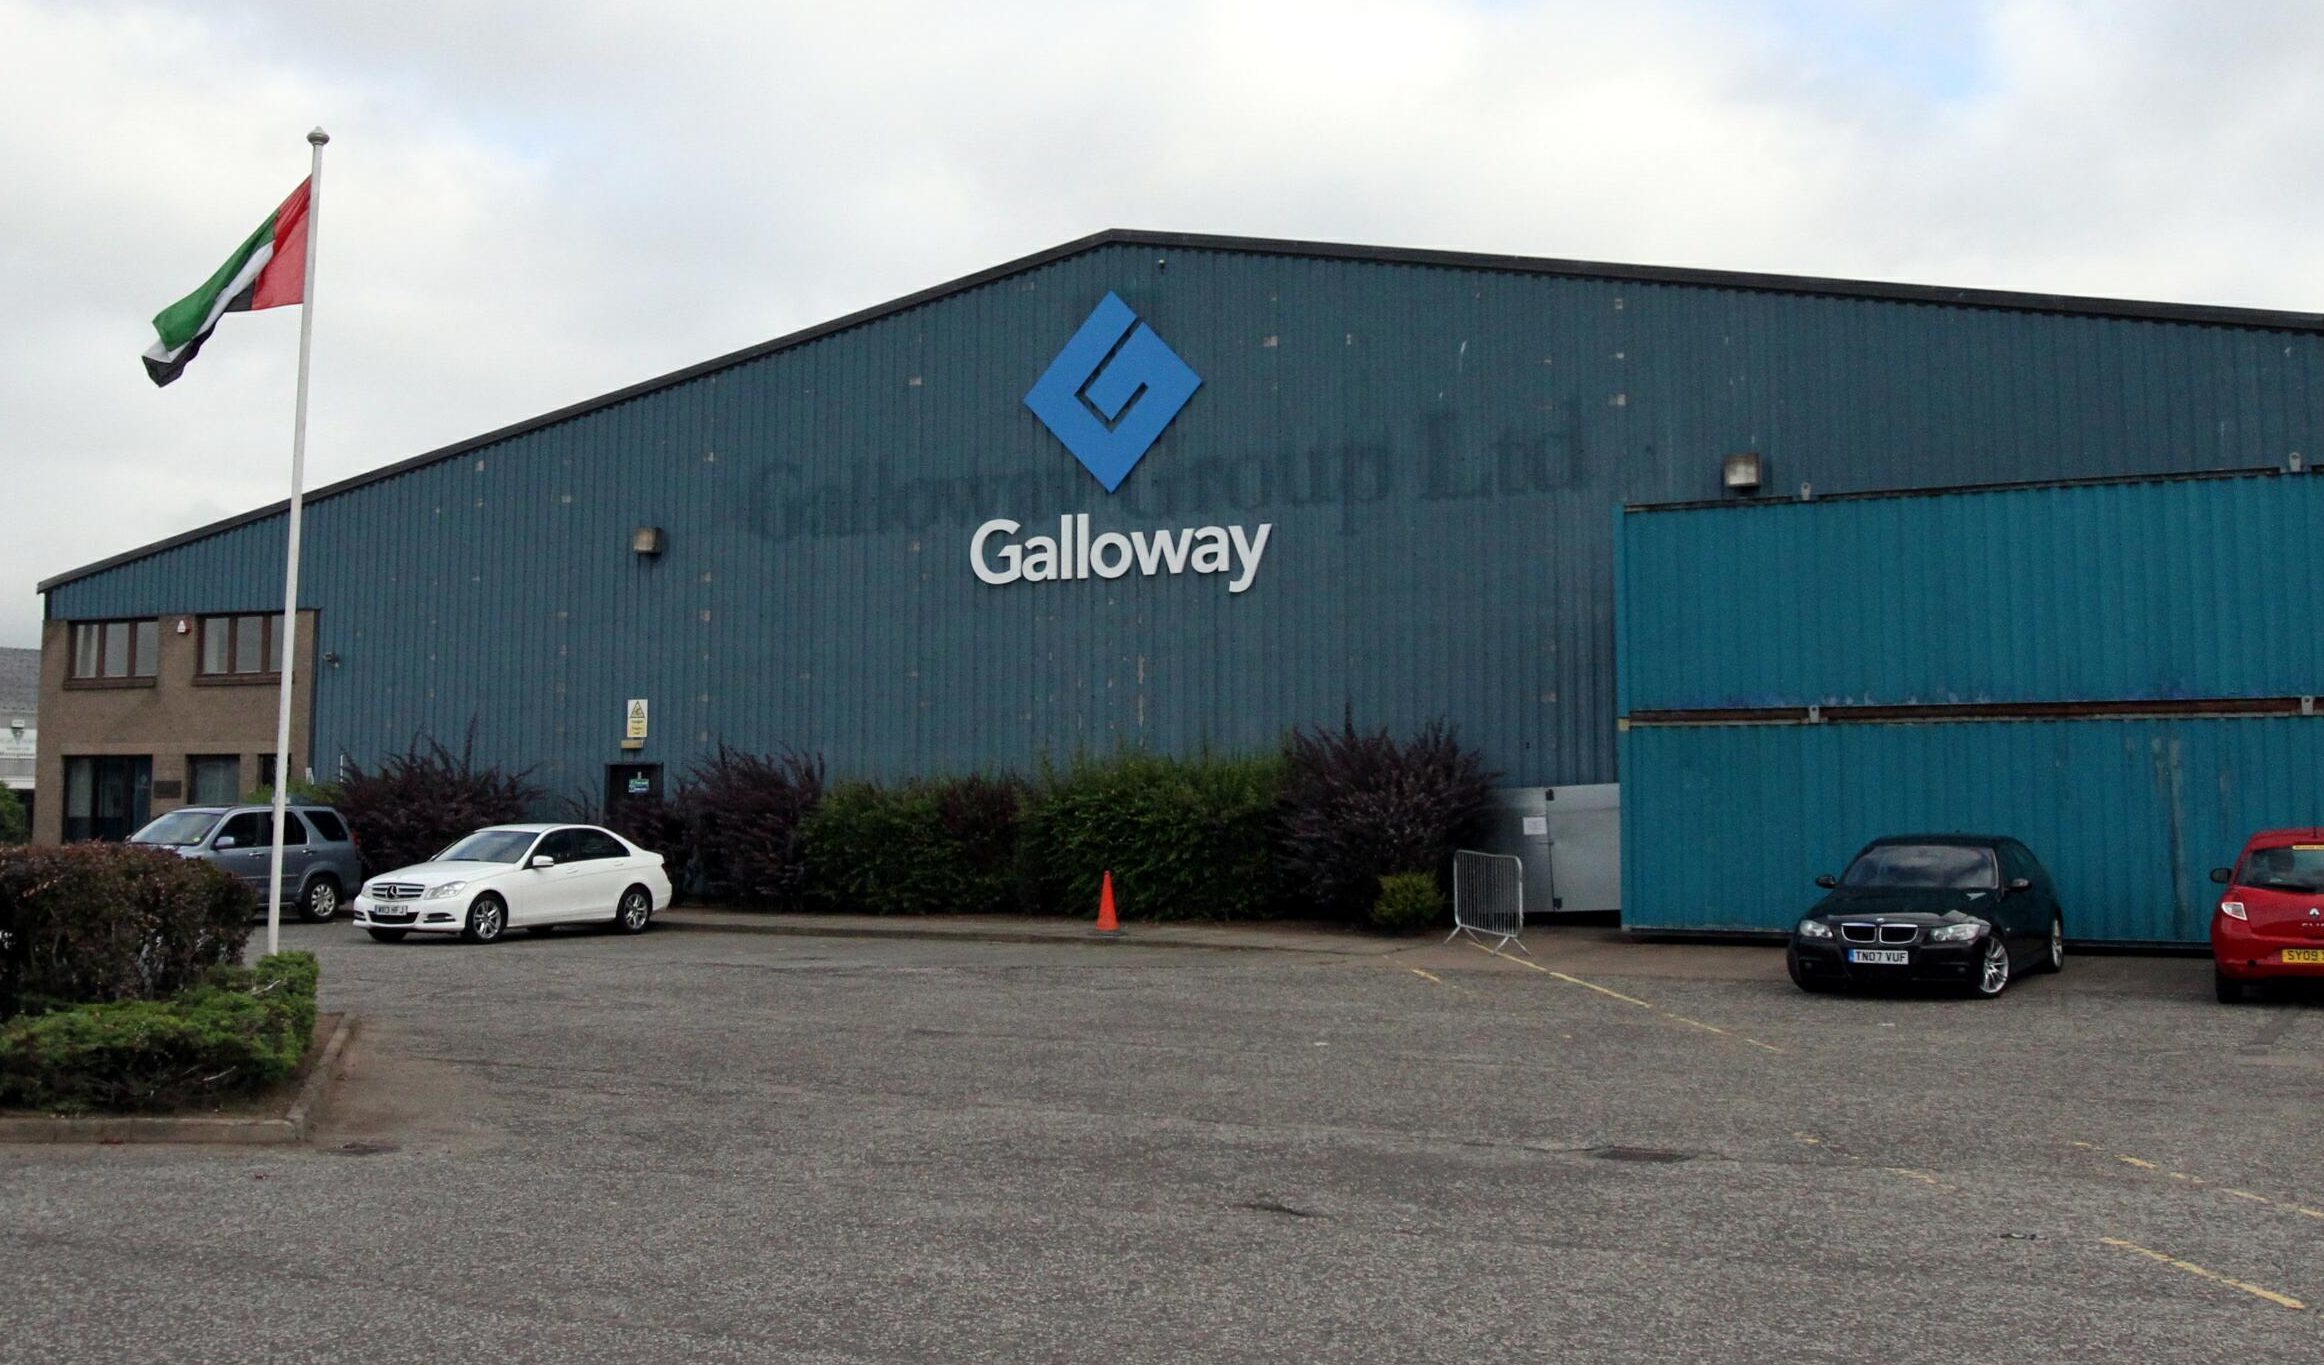 The Galloway Group factory at Wester Gourdie industrial estate.